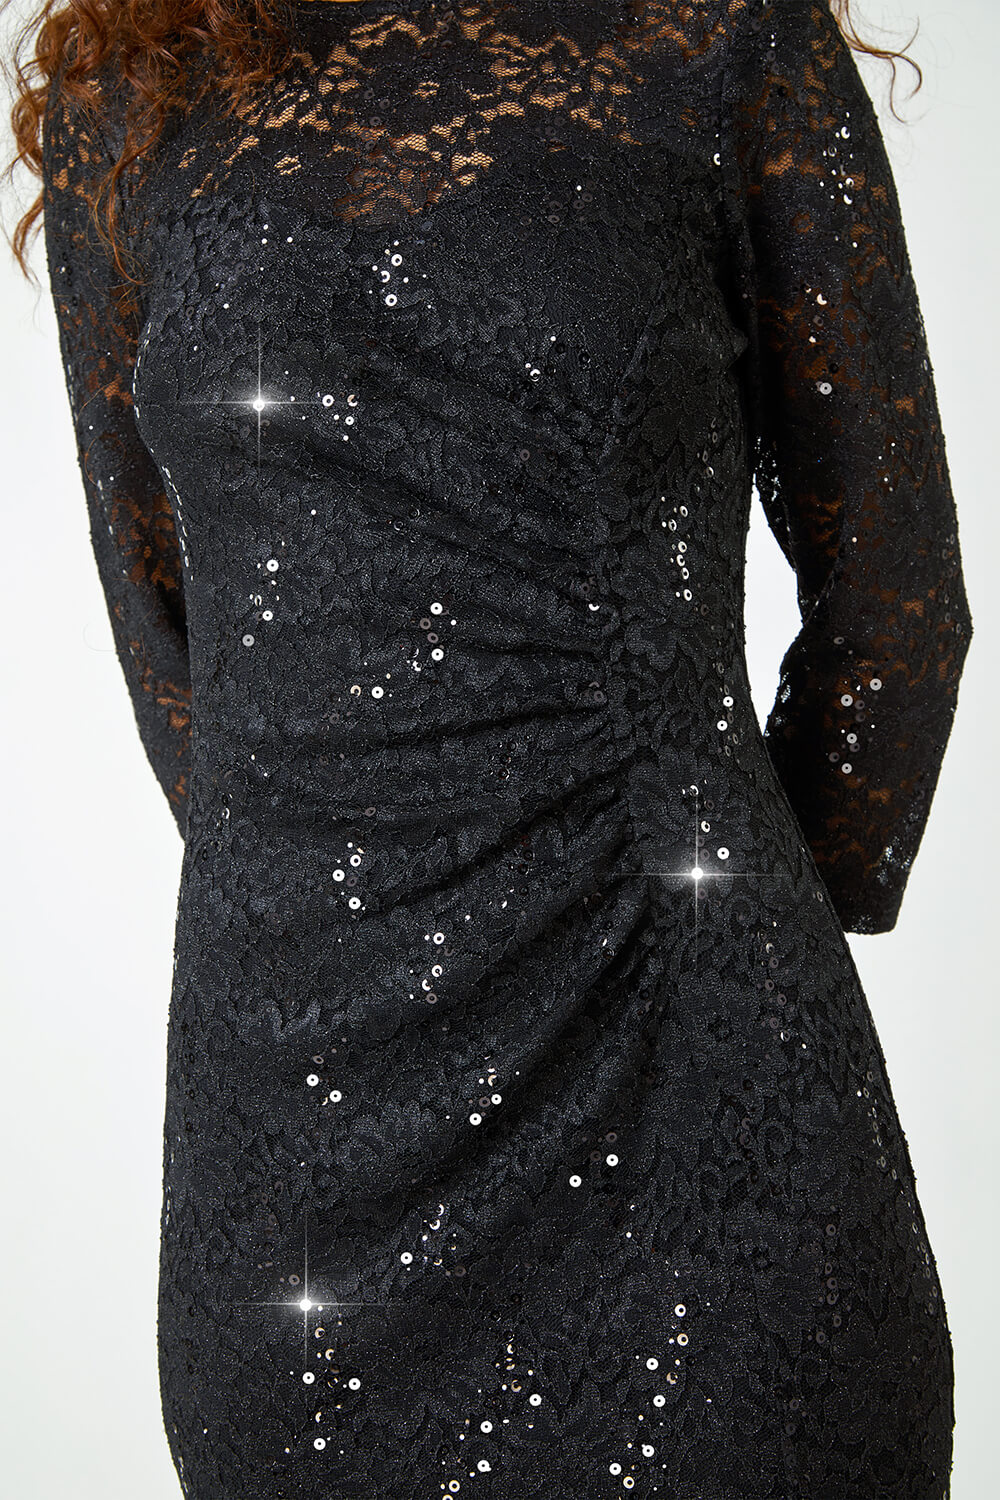 Black Sequin Lace Ruched Stretch Dress, Image 5 of 5